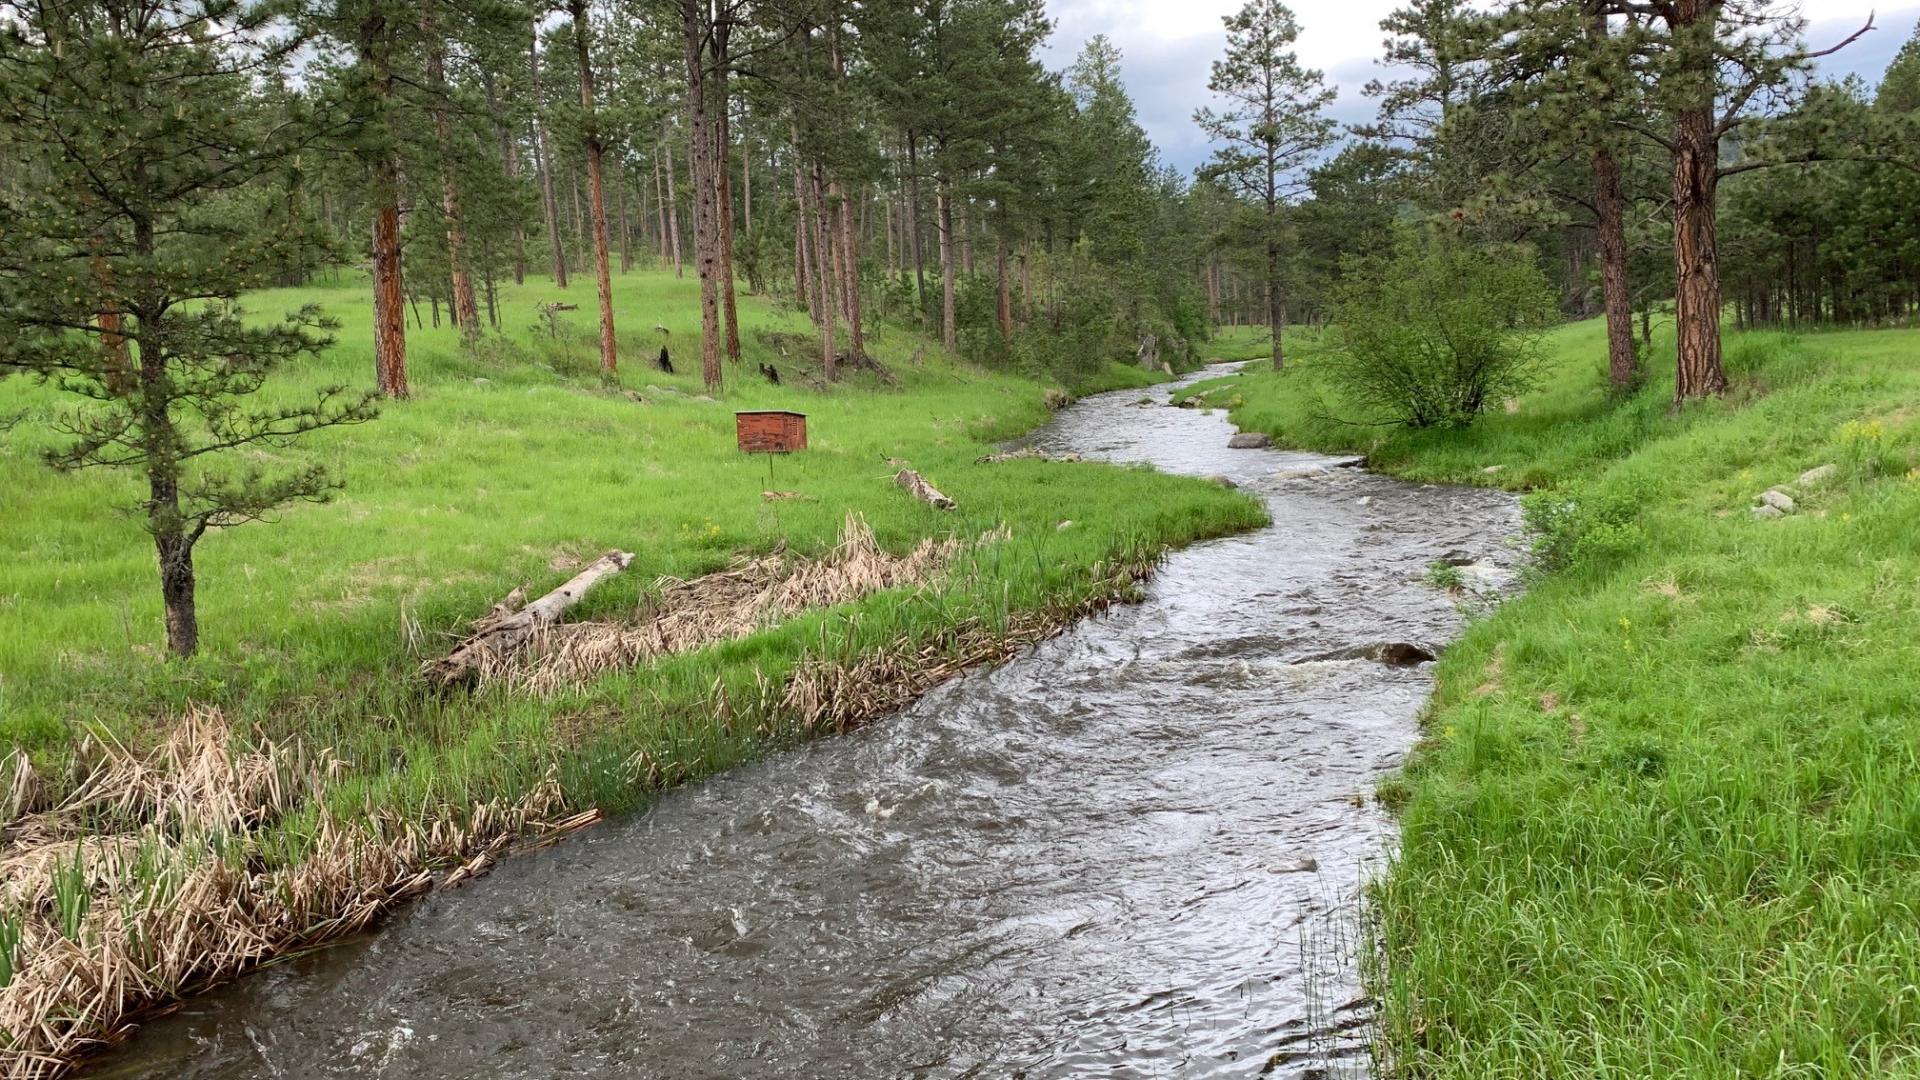 Small river with grass and trees - SD